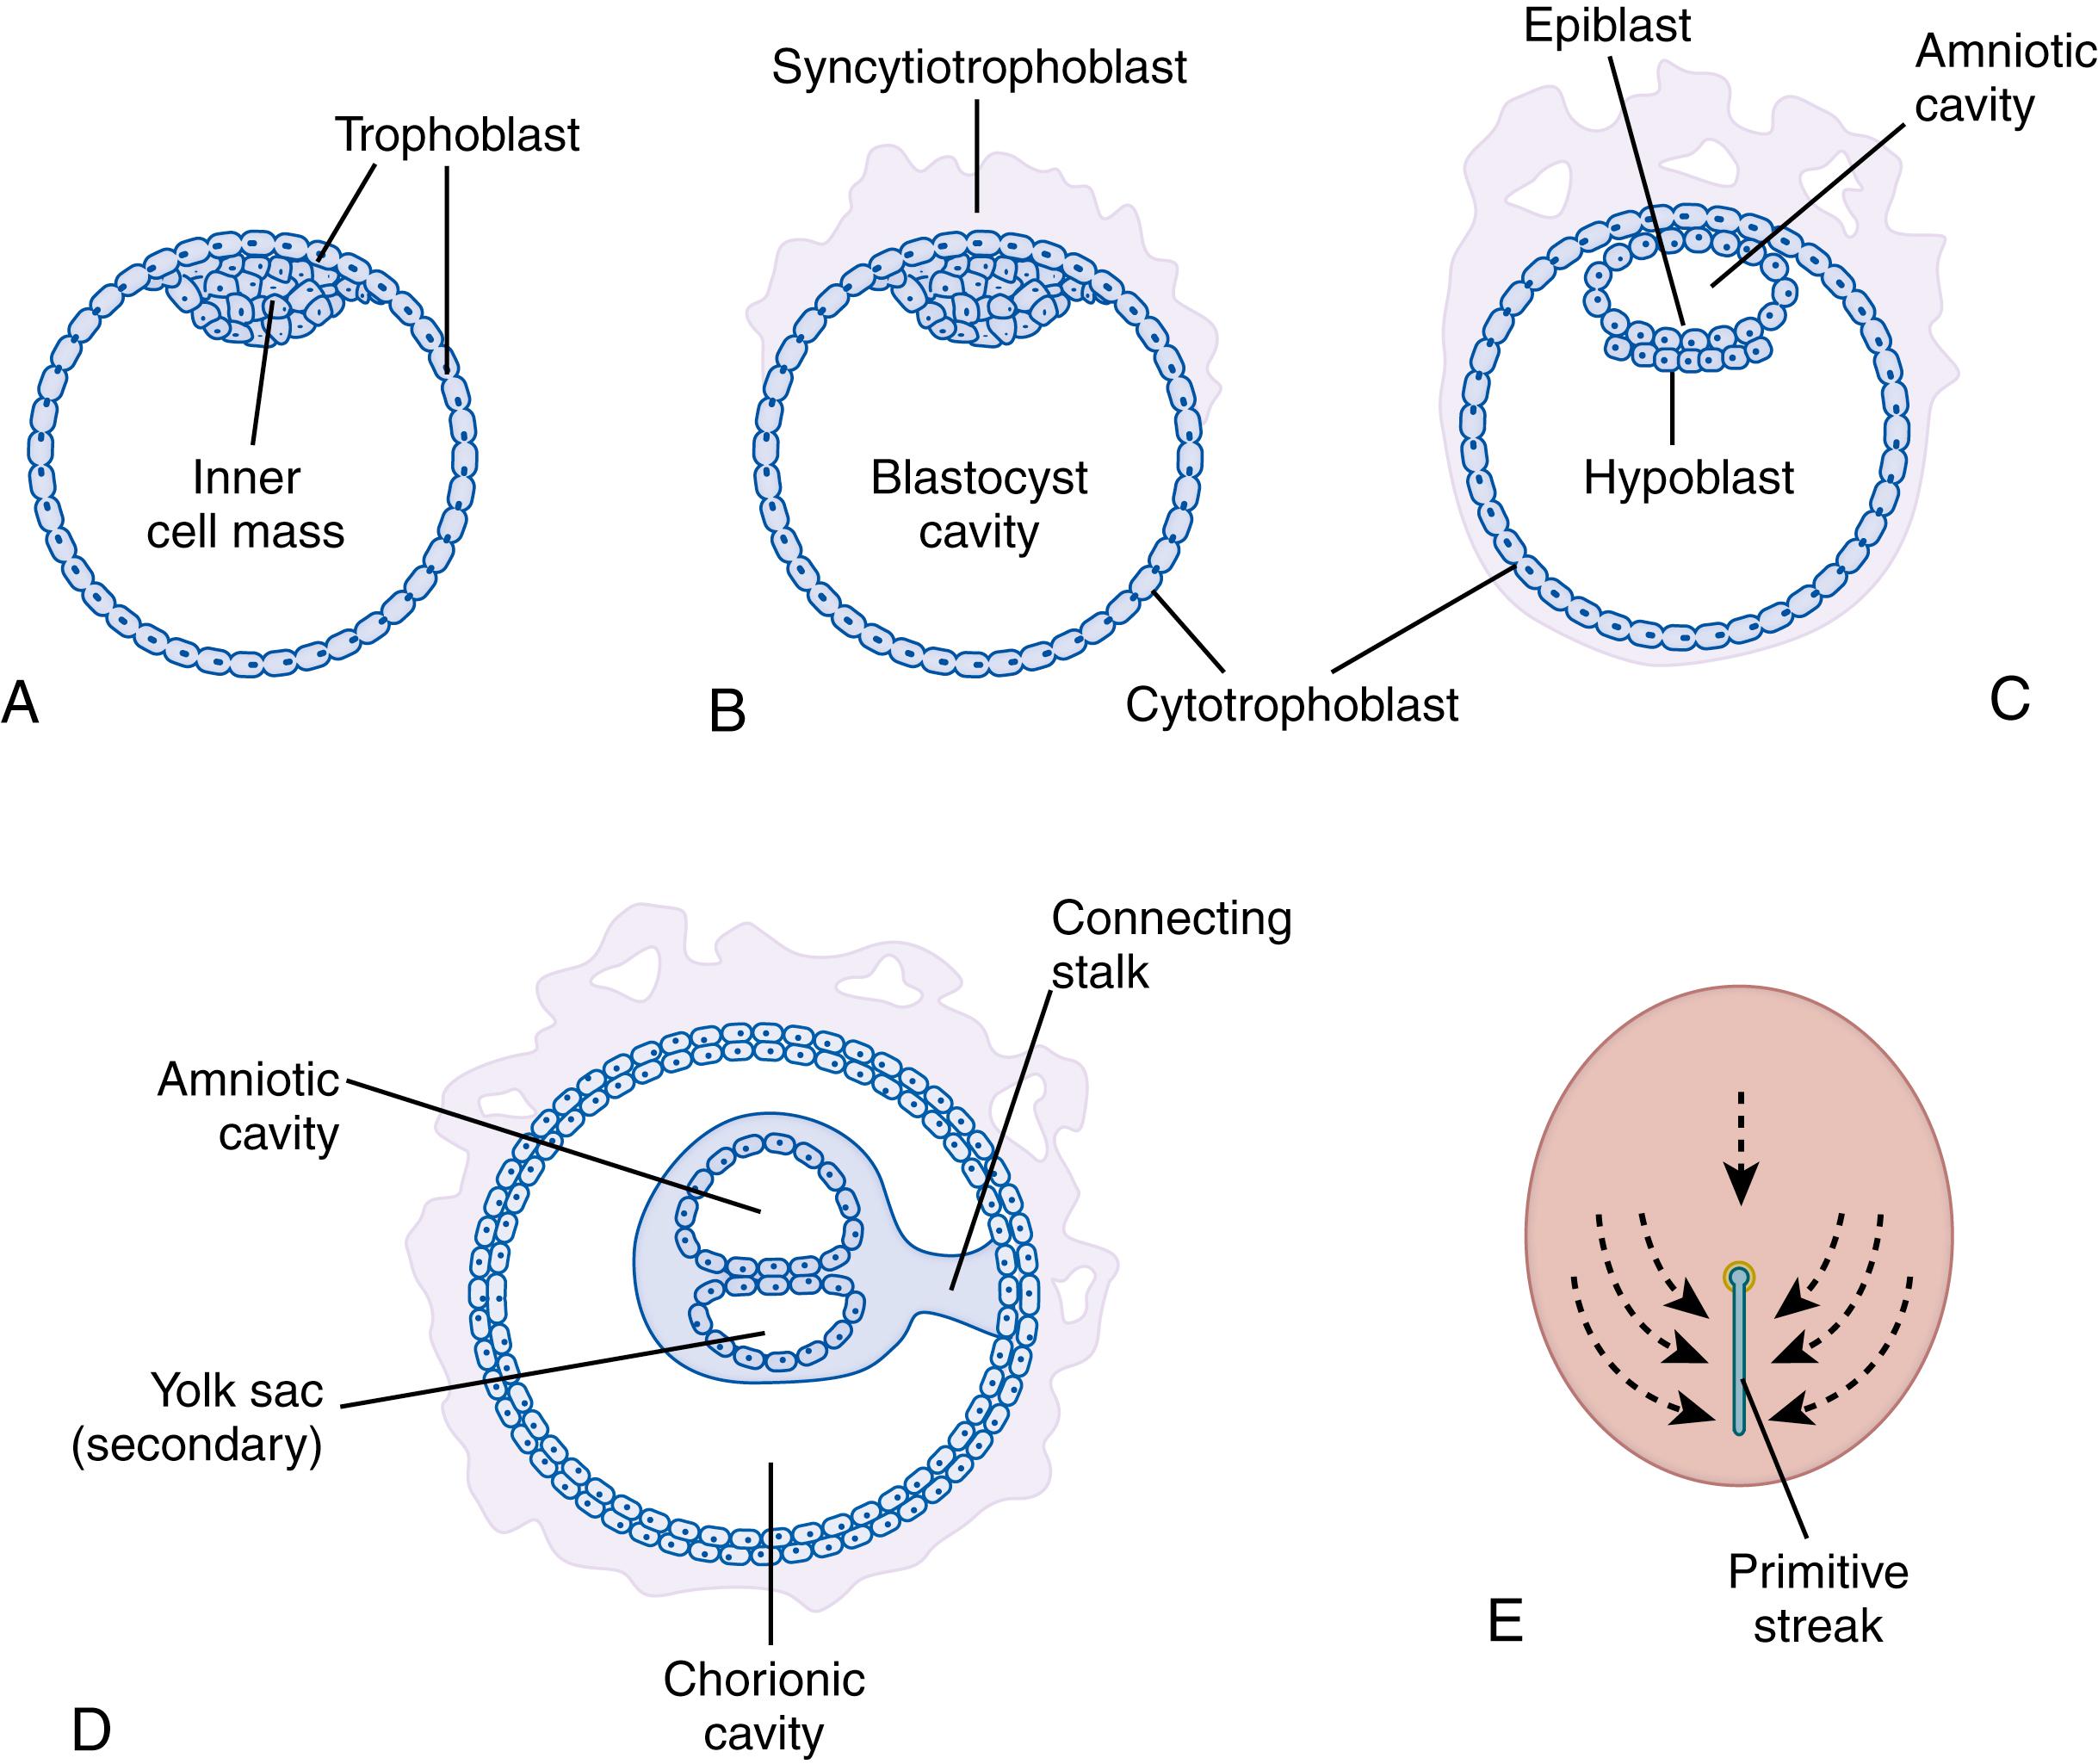 Fig. 3.4, Development of the blastocyst embryonic disk. (A) Blastocyst-stage human embryo, exhibiting the inner cell mass as a regionalized mass of cells projecting into the blastocyst cavity. The cavity is surrounded by trophoblast cells. (B) Blastocyst slightly older than that shown in A. At this time the inner cell mass and trophoblast cells are capped by cells of the syncytiotrophoblast, which are buried in the endometrial stroma (not shown). The cellular layer of trophoblast is now called the cytotrophoblast . (C) An older blastocyst-stage human embryo. The cavity is now surrounded by a double-layered membrane, and the inner cell mass has developed into a bilayered embryonic disk capped by a cavity (amniotic cavity). (D) This somewhat older, completely implanted embryo now exhibits cavities both above and below the embryonic disk, the amniotic cavity, and the yolk sac. No axial features are present in the disk at this time; cephalic and caudal regions cannot be discerned. (E) Surface view of the embryonic disk, showing the primitive streak. This midline thickening of epiblast cells occurs during the early part of the third week after fertilization and produces a landmark (the primitive streak) that delineates the midline of the embryo and reveals the future cephalic and caudal ends. The thickening of epiblast cells in the midline (primitive streak) is actually an increased population of cells in this region, resulting from both a high mitotic rate in the midline and migration of a subpopulation of epiblast cells to a midline position. The arrows indicate migration of the epiblast cells.